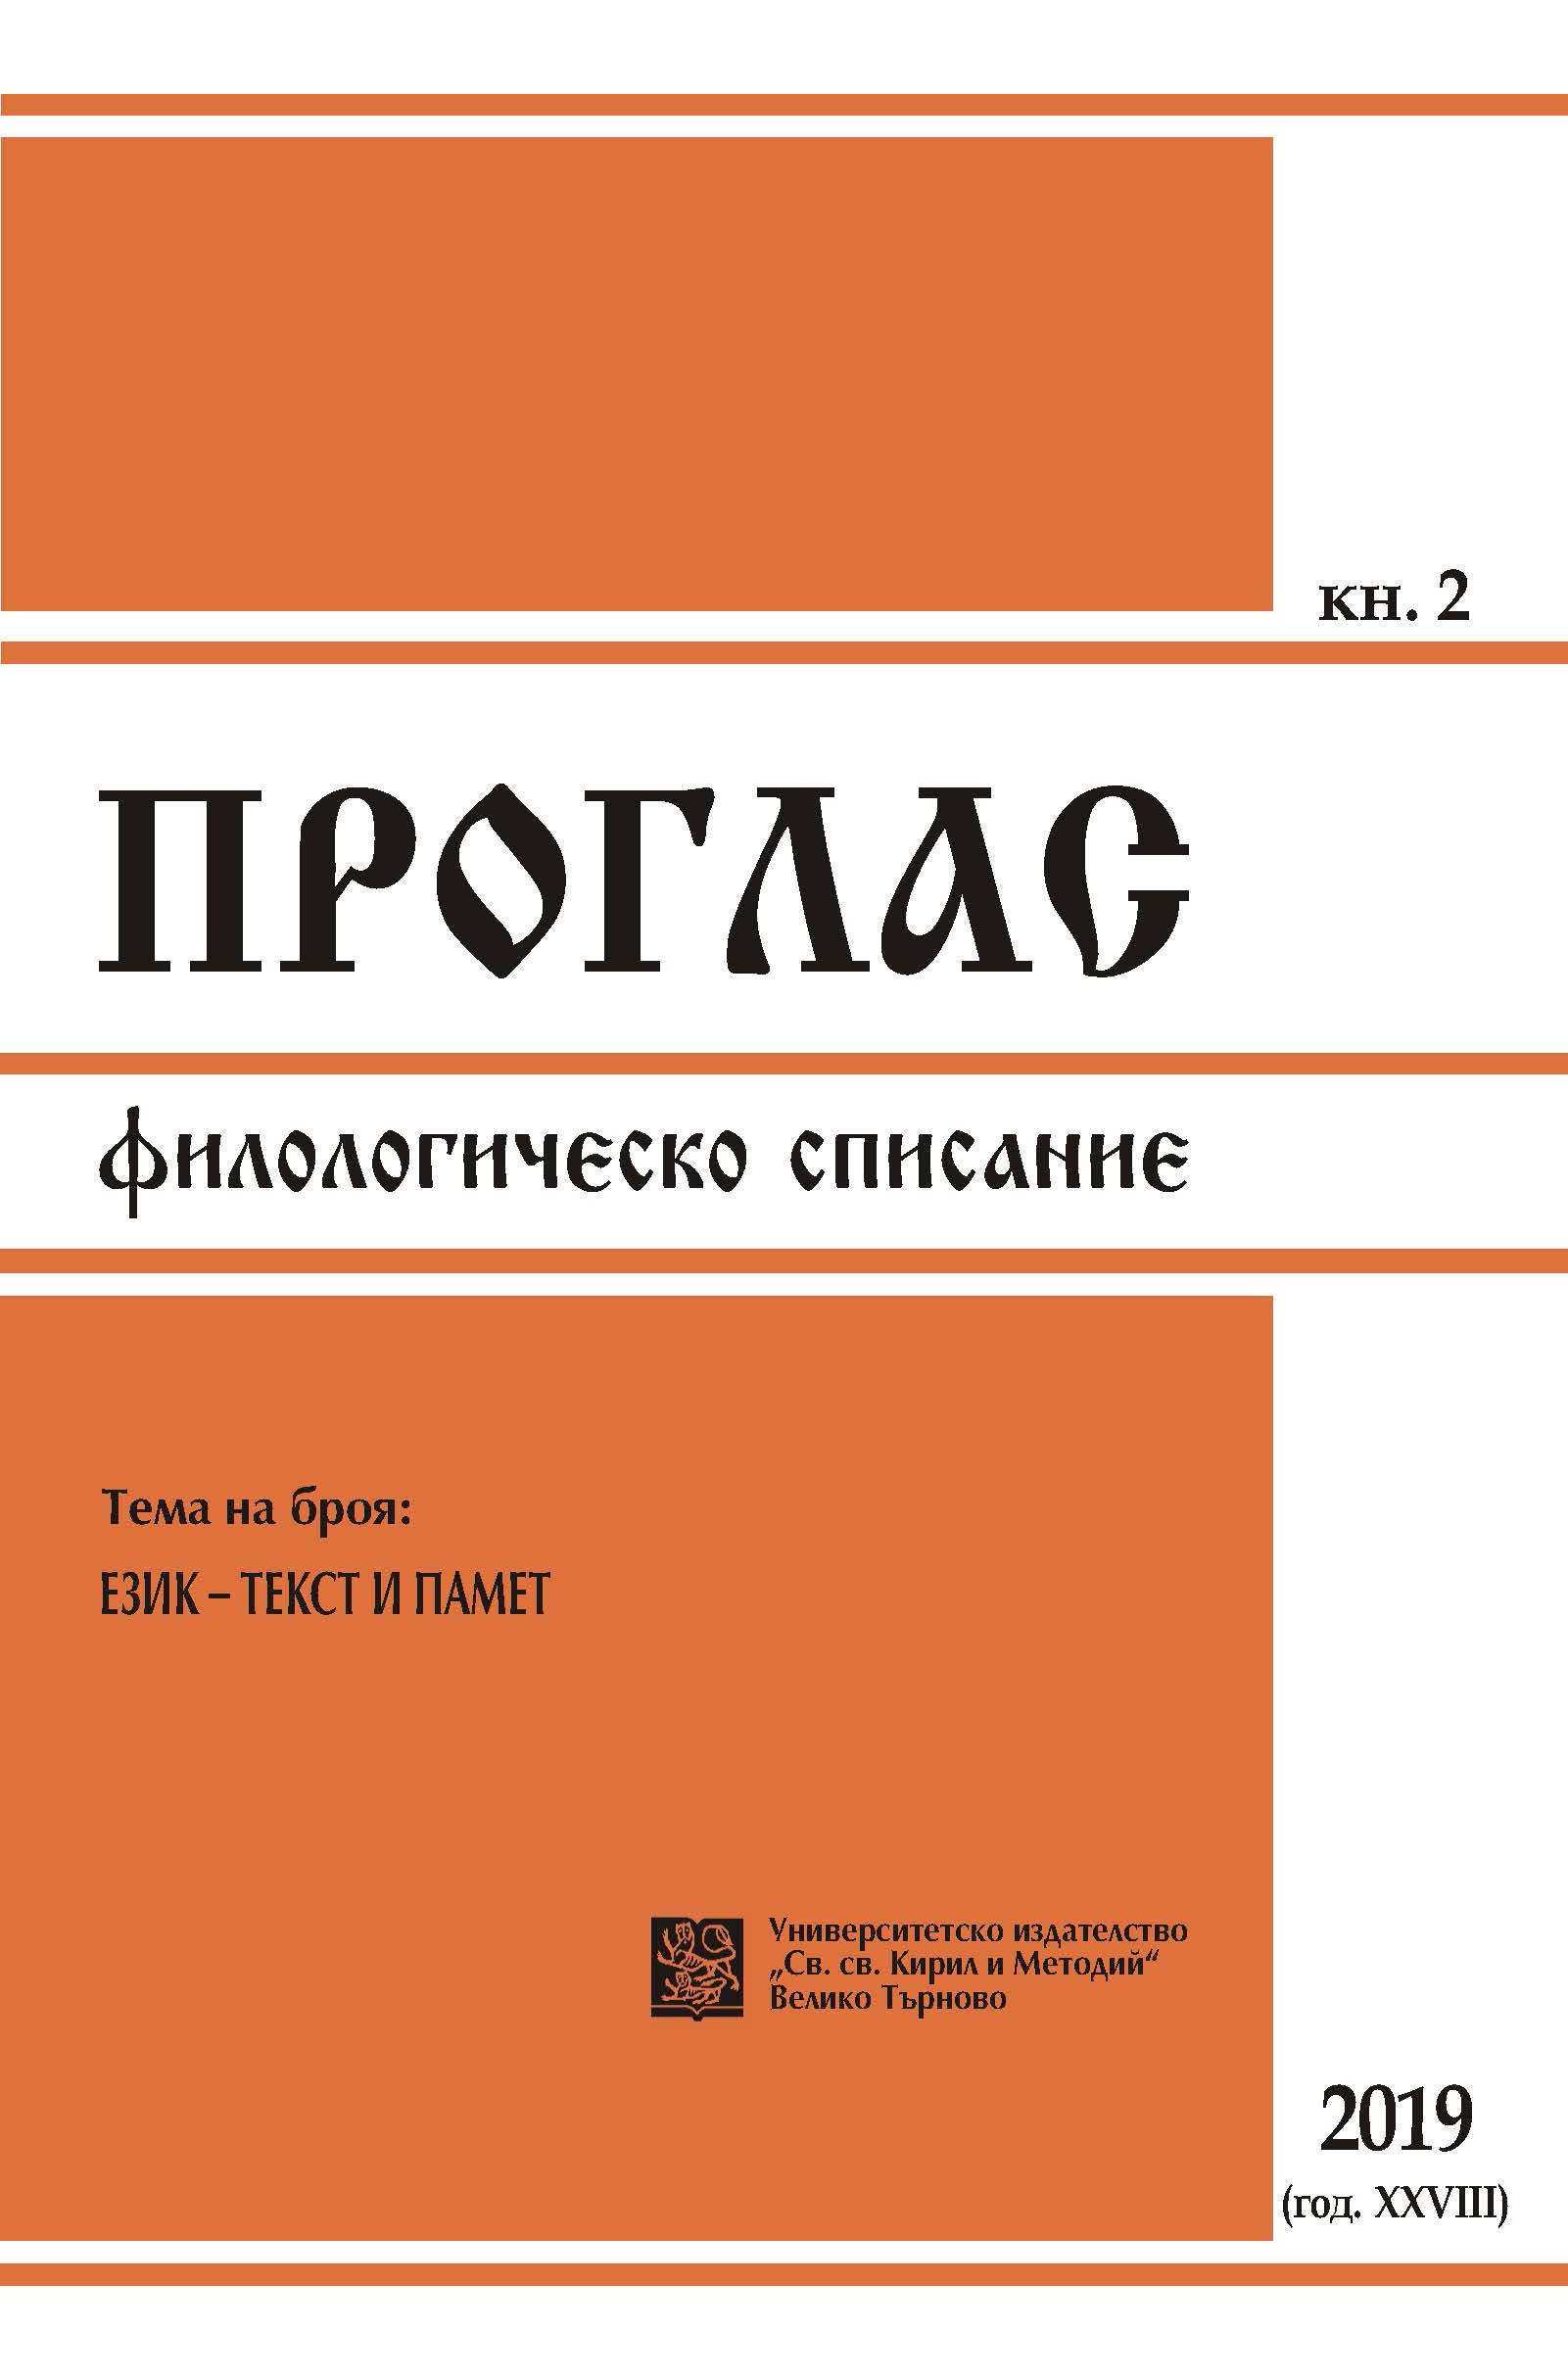 Varia: On ‘speaker ghosting’ and the ‘sequence of tense and mood’ rule in the bulgarian language Cover Image